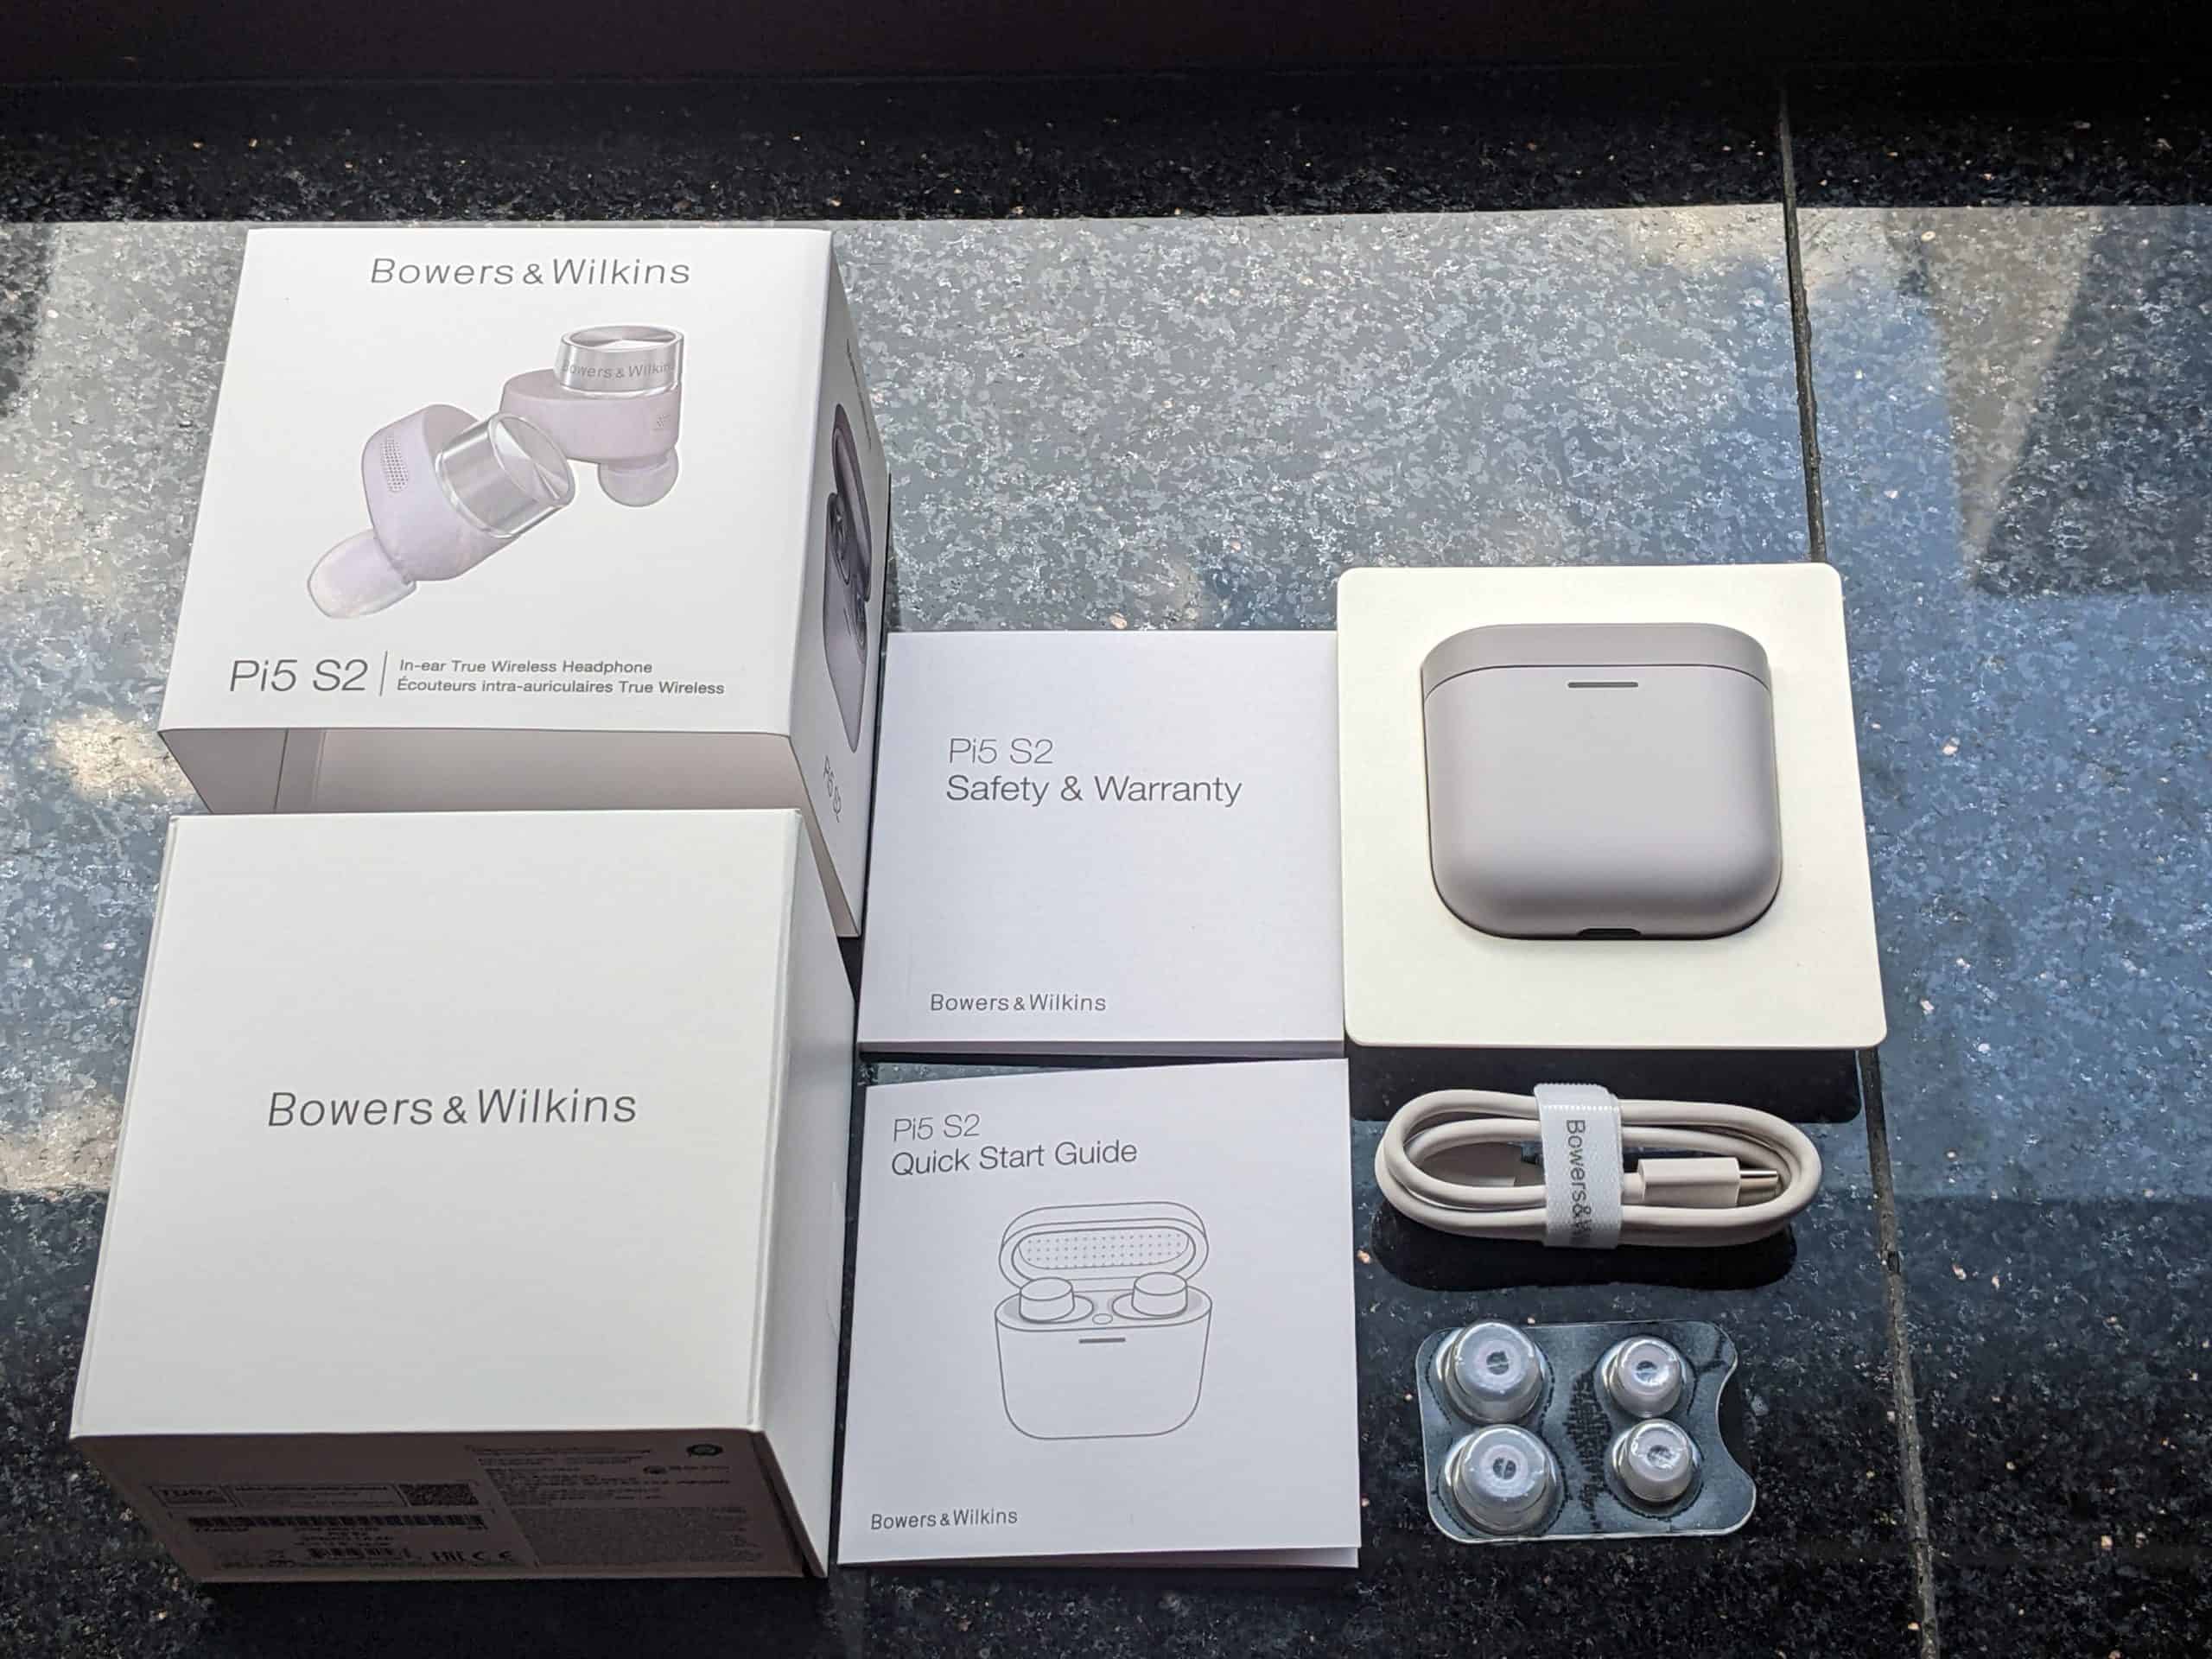 Bowers and Wilkins wireless buds, ear tips, charging case, USBC charging cable, manual, safety guide